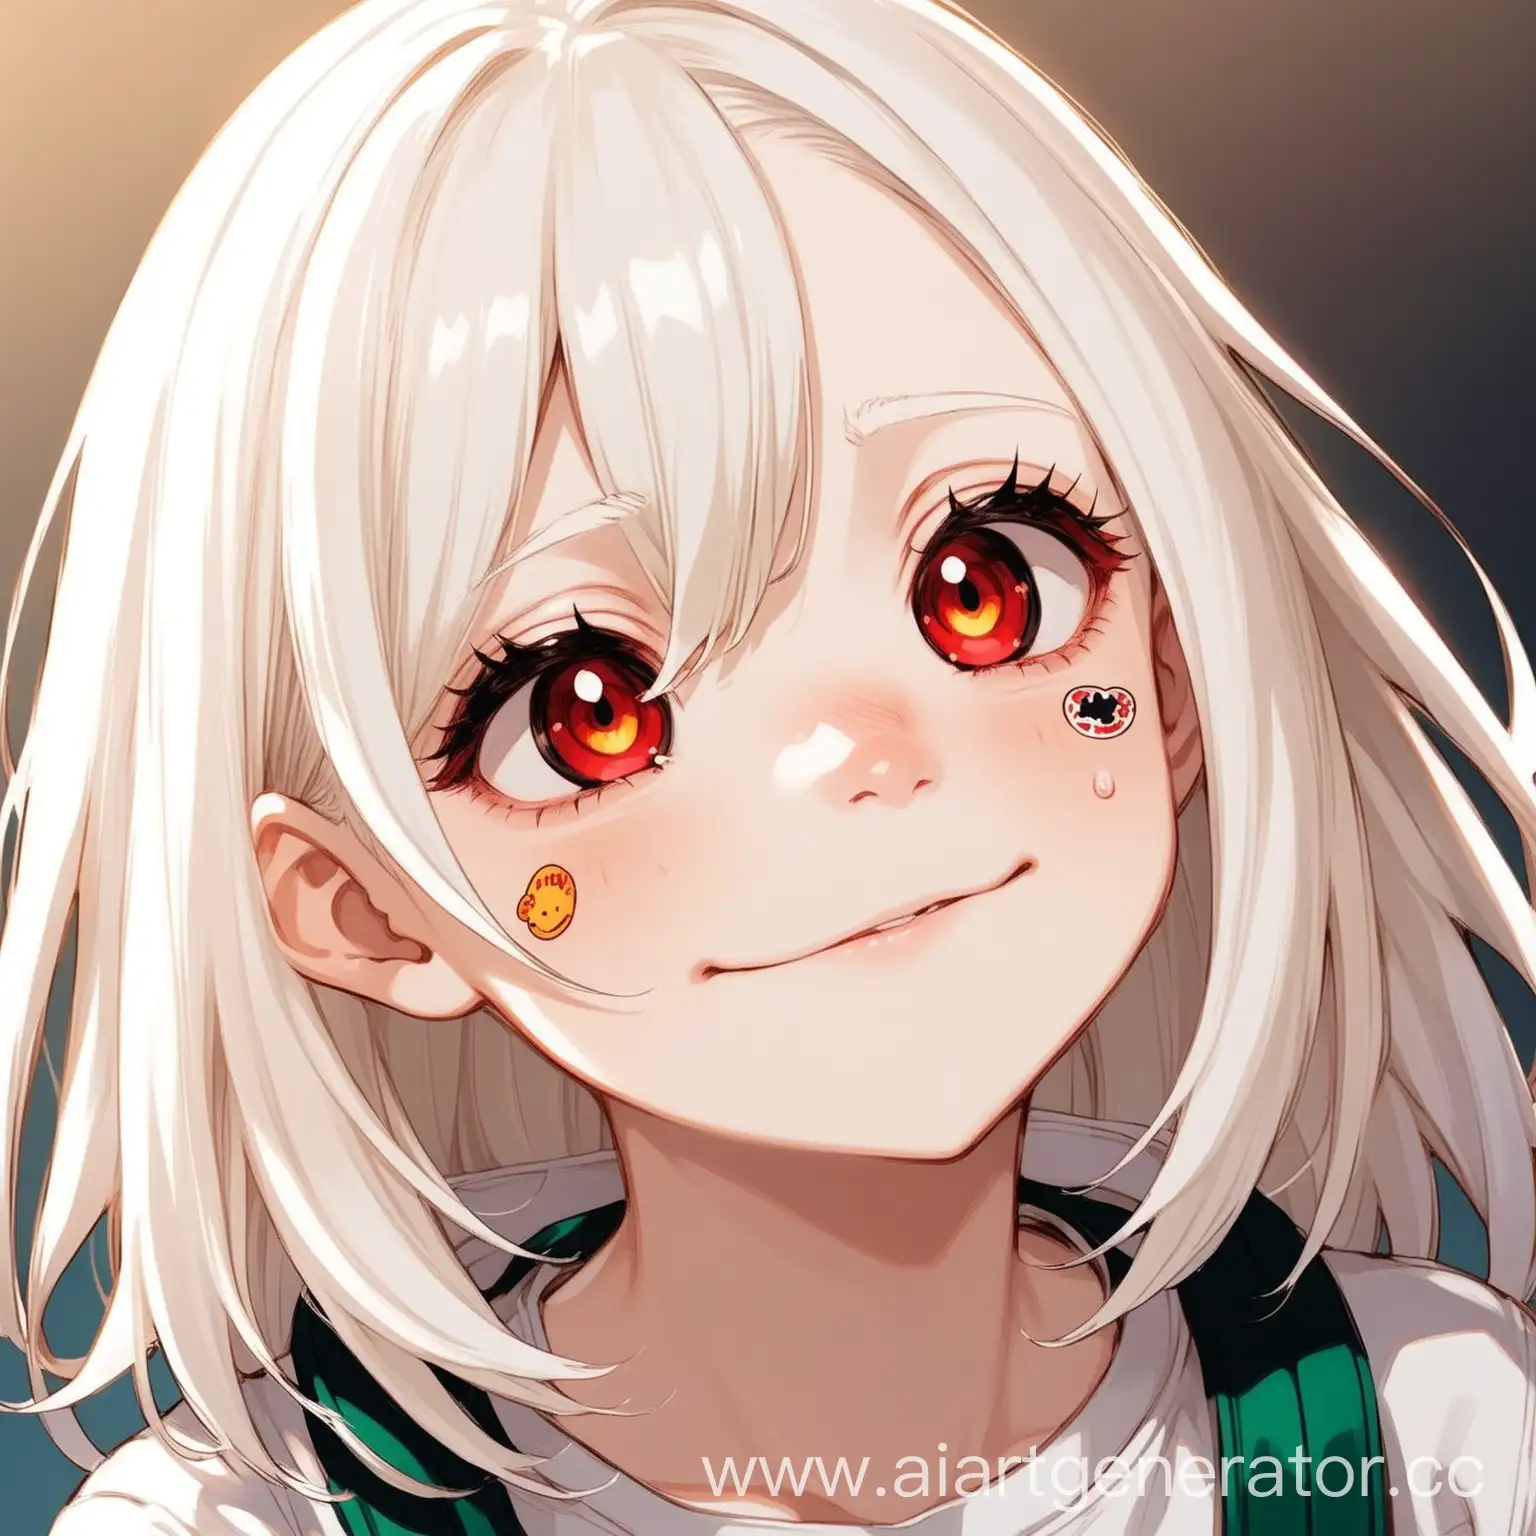 Albino-Girl-with-Bright-Red-Eyes-and-Cute-Stickers-on-Cheeks